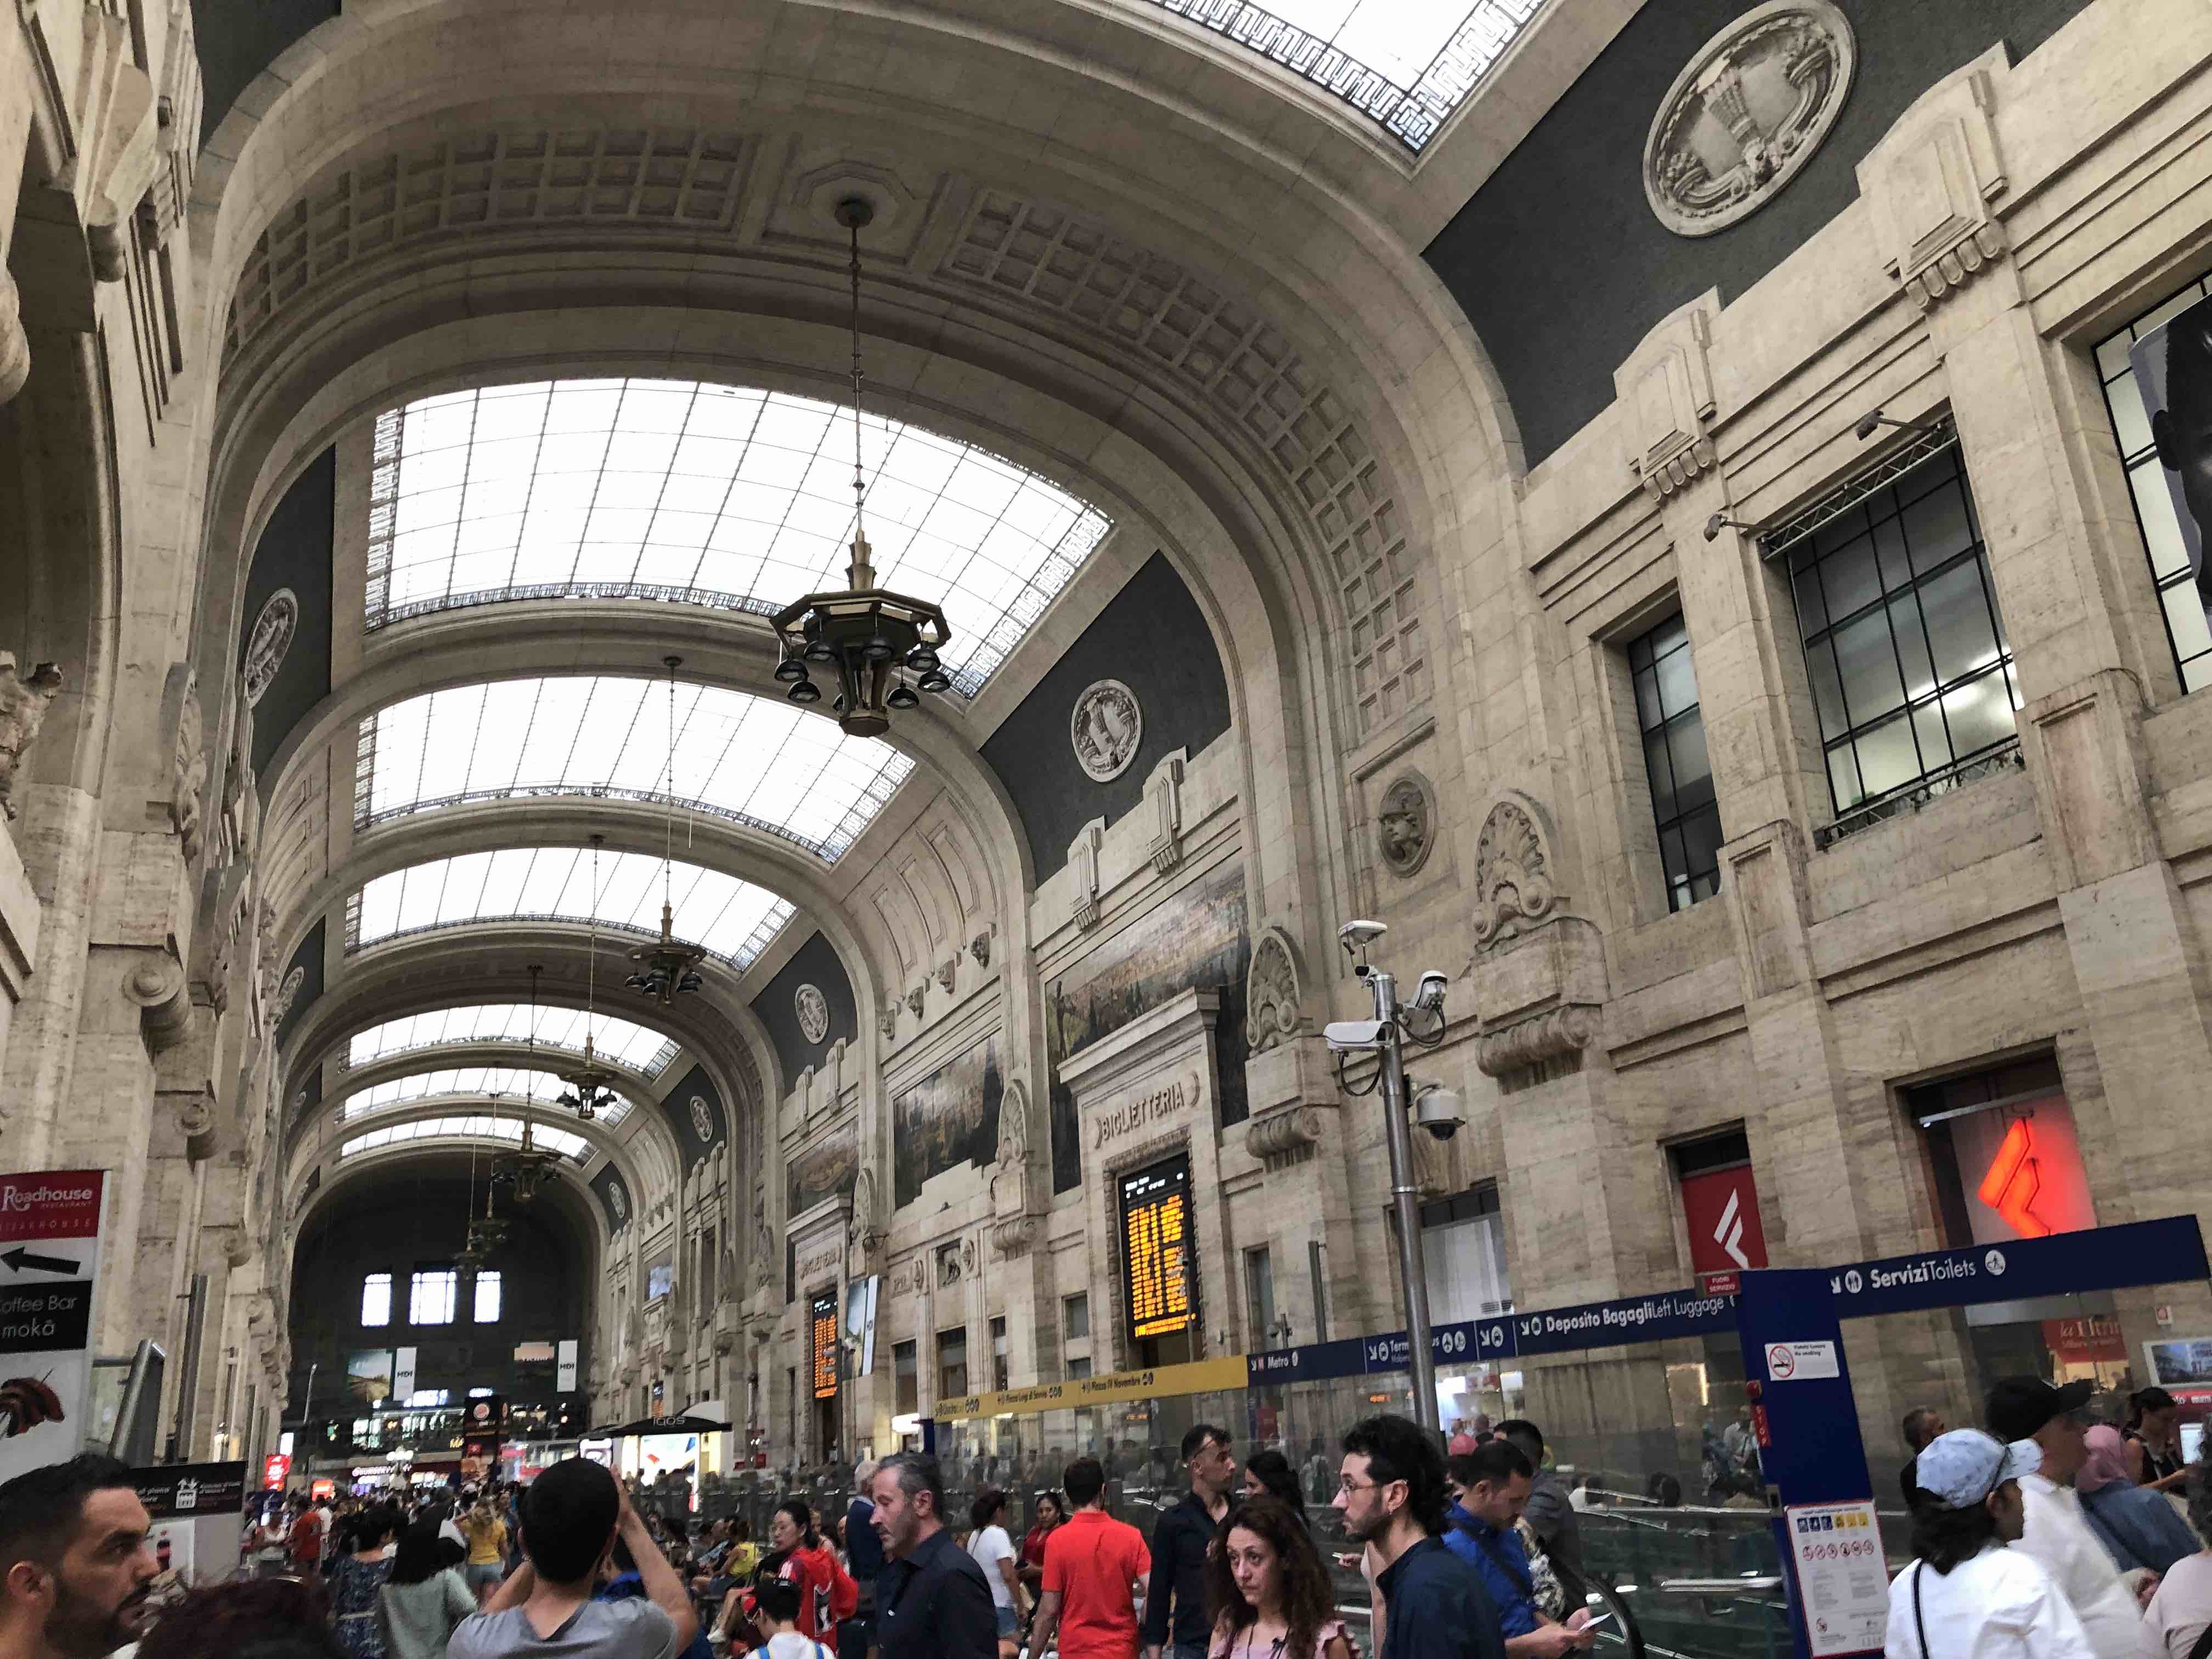 Inside the Milan Centrale train station